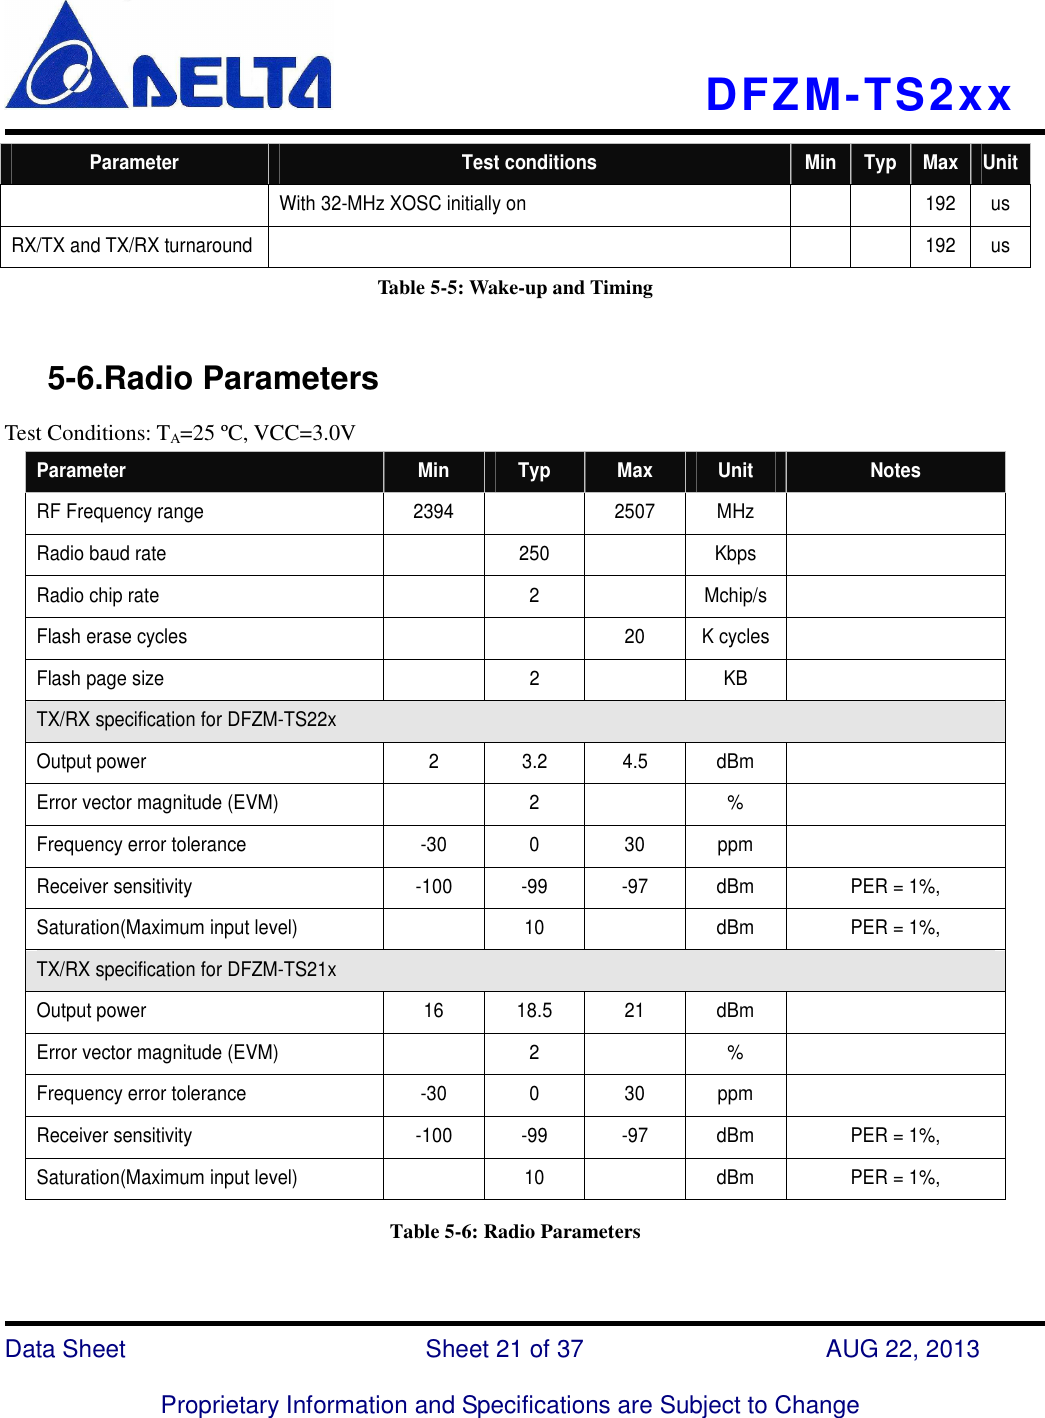    DFZM-TS2xx   Data Sheet                              Sheet 21 of 37                    AUG 22, 2013  Proprietary Information and Specifications are Subject to Change Parameter  Test conditions  Min Typ Max Unit With 32-MHz XOSC initially on      192 us RX/TX and TX/RX turnaround       192 us Table 5-5: Wake-up and Timing       5-6.Radio Parameters Test Conditions: TA=25 ºC, VCC=3.0V Parameter  Min  Typ  Max  Unit  Notes RF Frequency range  2394    2507  MHz   Radio baud rate    250    Kbps   Radio chip rate    2    Mchip/s   Flash erase cycles      20  K cycles  Flash page size    2    KB   TX/RX specification for DFZM-TS22x Output power    2  3.2  4.5  dBm   Error vector magnitude (EVM)    2    %   Frequency error tolerance  -30  0  30  ppm   Receiver sensitivity  -100  -99  -97  dBm  PER = 1%, Saturation(Maximum input level)    10    dBm  PER = 1%, TX/RX specification for DFZM-TS21x Output power    16  18.5  21  dBm   Error vector magnitude (EVM)    2    %   Frequency error tolerance  -30  0  30  ppm   Receiver sensitivity  -100  -99  -97  dBm  PER = 1%, Saturation(Maximum input level)    10    dBm  PER = 1%, Table 5-6: Radio Parameters  